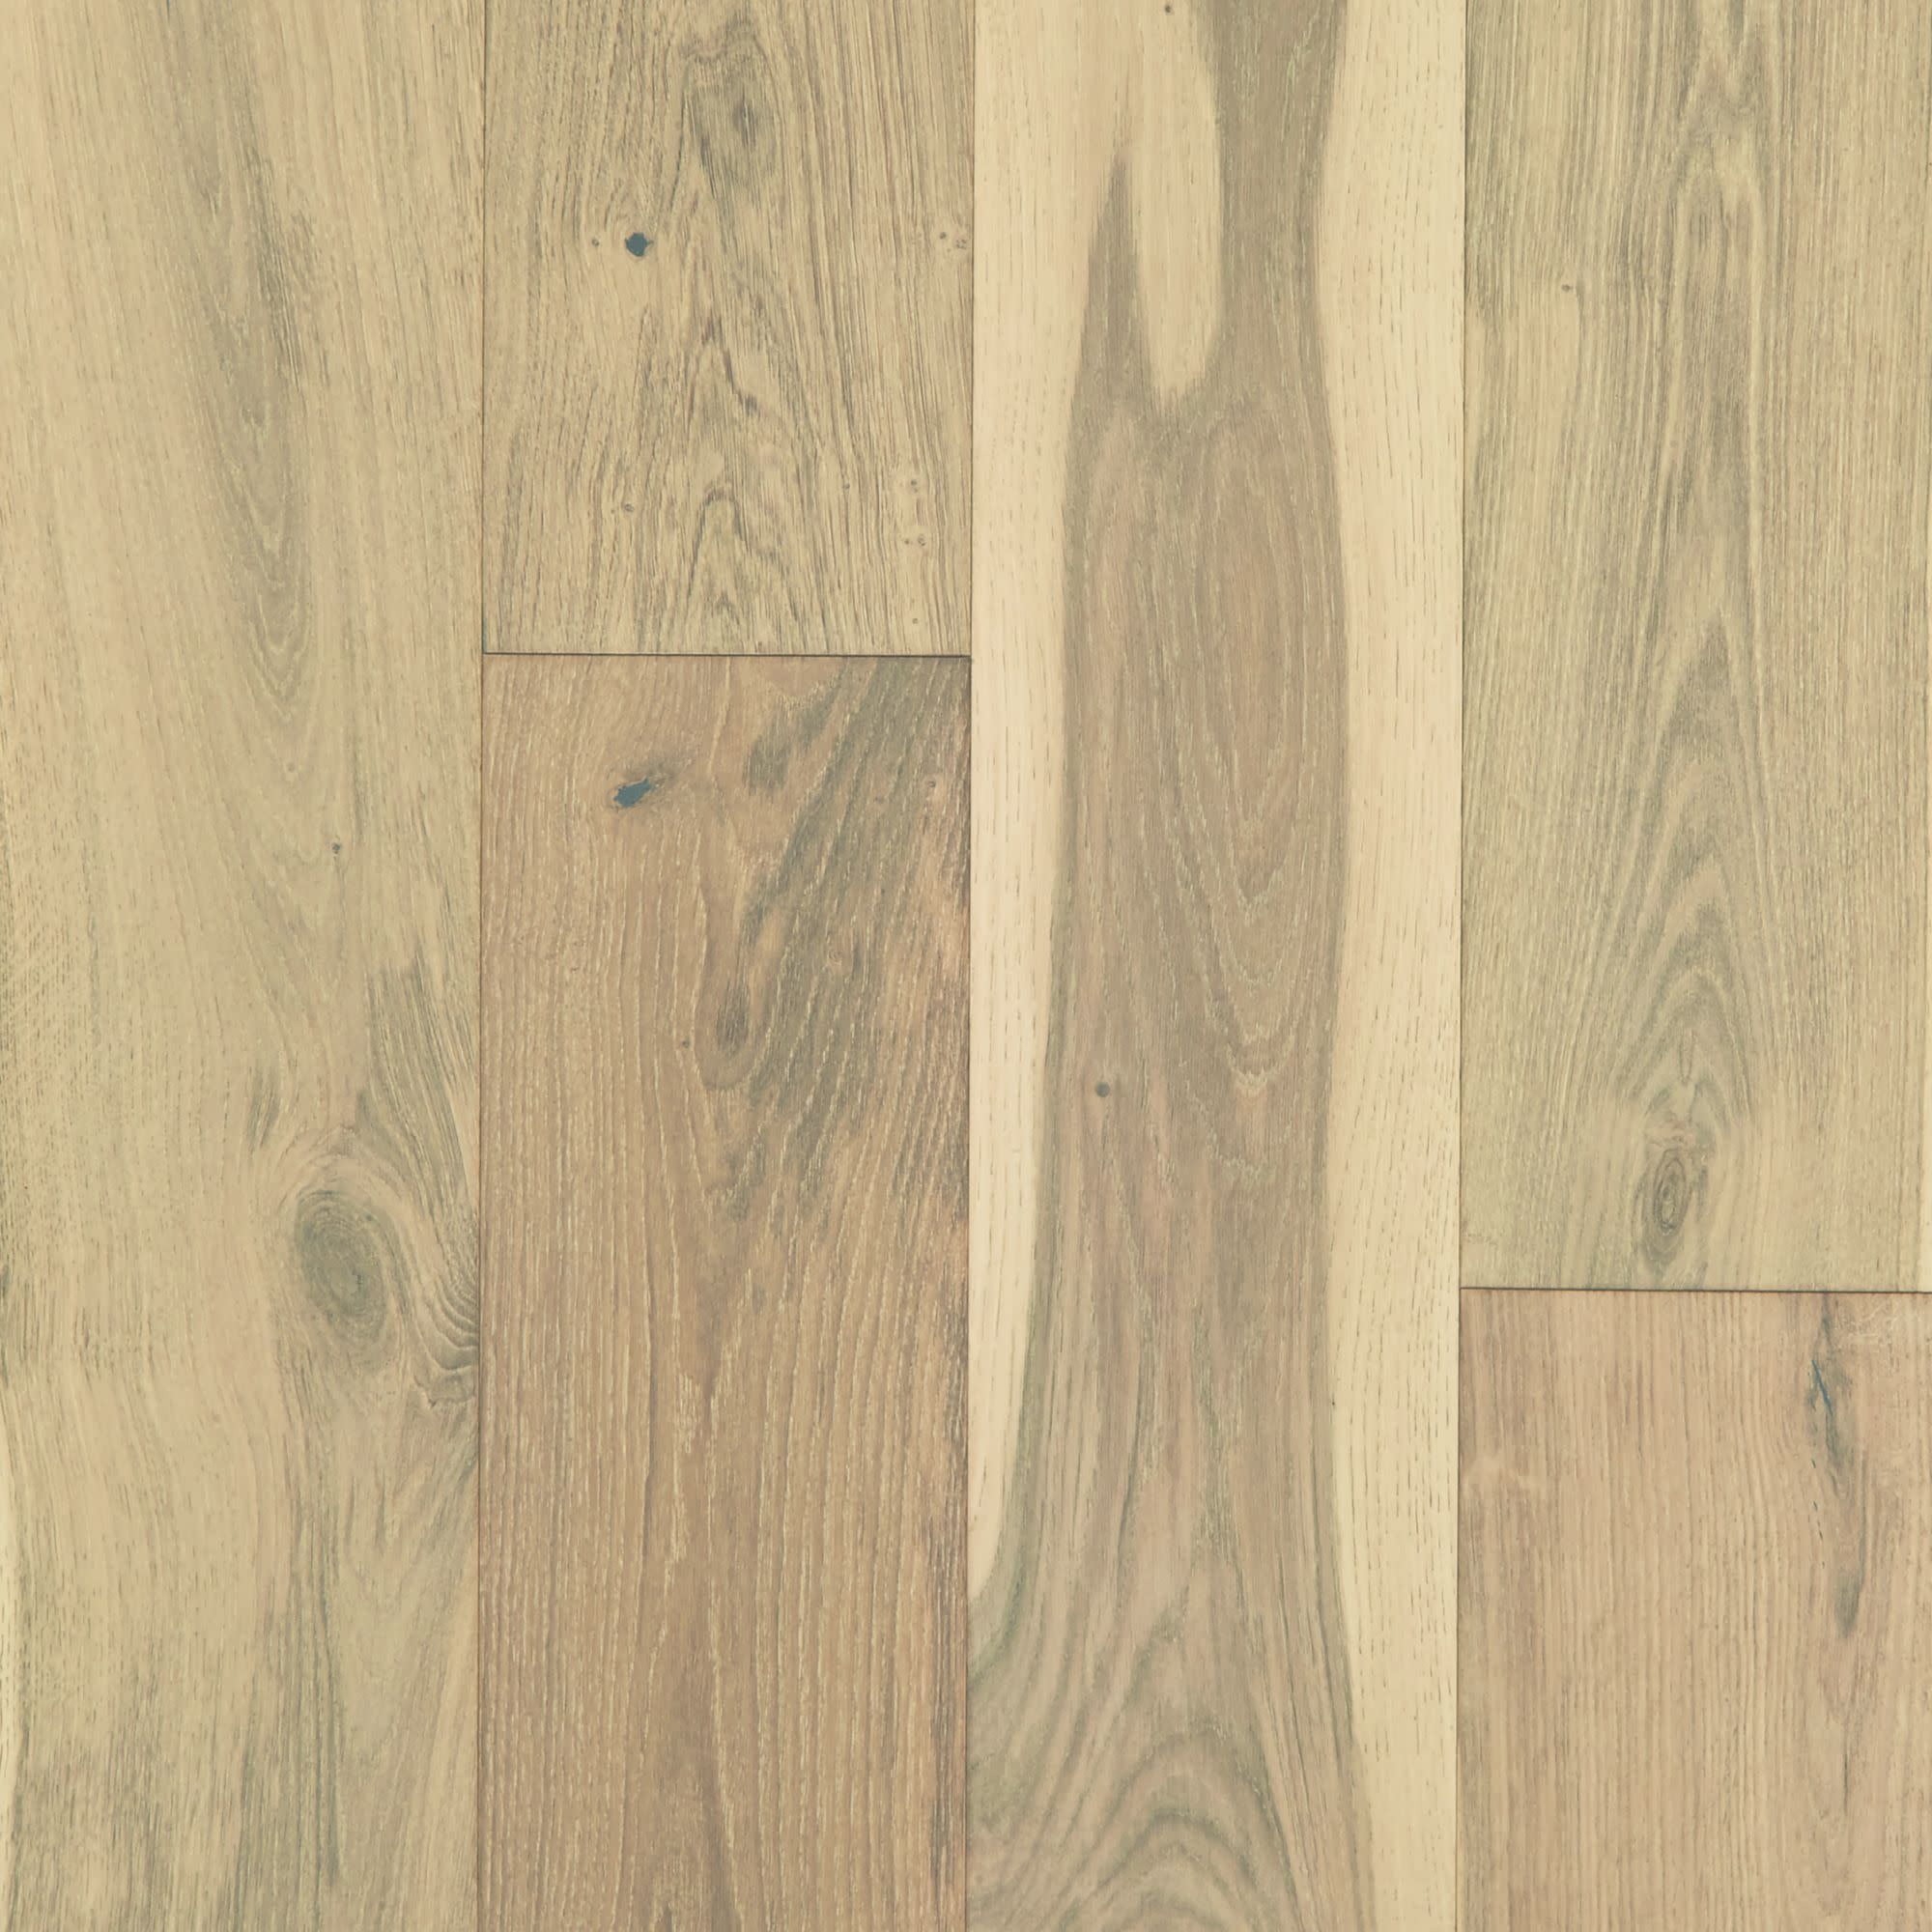 Shaw Fh820 Exquisite 7 1 2 Wide, Shaw Hardwood Flooring Reviews